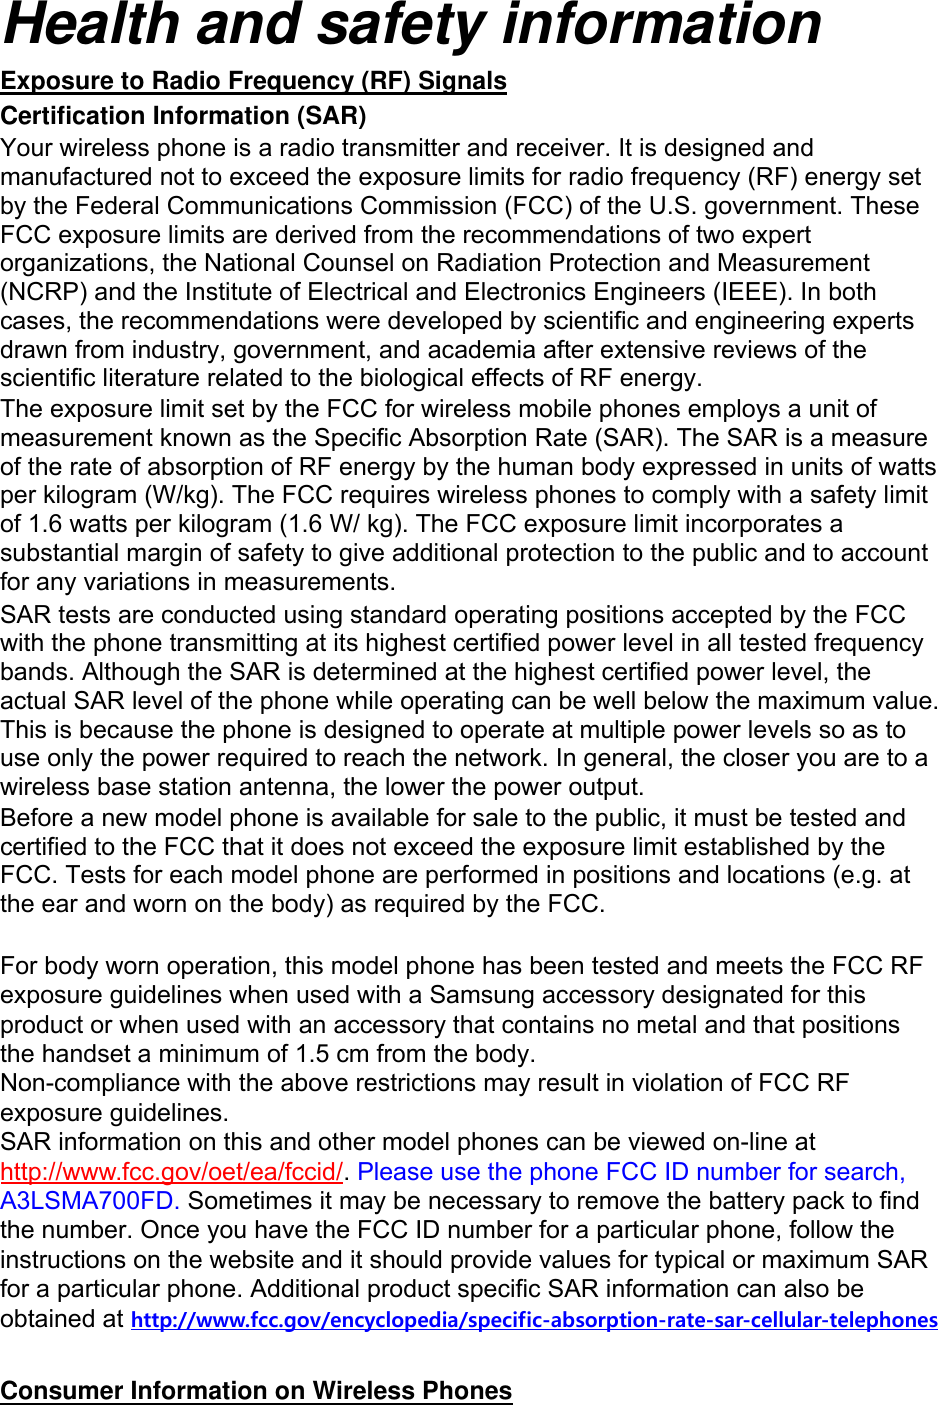 Health and safety information Exposure to Radio Frequency (RF) Signals Certification Information (SAR) Your wireless phone is a radio transmitter and receiver. It is designed and manufactured not to exceed the exposure limits for radio frequency (RF) energy set by the Federal Communications Commission (FCC) of the U.S. government. These FCC exposure limits are derived from the recommendations of two expert organizations, the National Counsel on Radiation Protection and Measurement (NCRP) and the Institute of Electrical and Electronics Engineers (IEEE). In both cases, the recommendations were developed by scientific and engineering experts drawn from industry, government, and academia after extensive reviews of the scientific literature related to the biological effects of RF energy. The exposure limit set by the FCC for wireless mobile phones employs a unit of measurement known as the Specific Absorption Rate (SAR). The SAR is a measure of the rate of absorption of RF energy by the human body expressed in units of watts per kilogram (W/kg). The FCC requires wireless phones to comply with a safety limit of 1.6 watts per kilogram (1.6 W/ kg). The FCC exposure limit incorporates a substantial margin of safety to give additional protection to the public and to account for any variations in measurements. SAR tests are conducted using standard operating positions accepted by the FCC with the phone transmitting at its highest certified power level in all tested frequency bands. Although the SAR is determined at the highest certified power level, the actual SAR level of the phone while operating can be well below the maximum value. This is because the phone is designed to operate at multiple power levels so as to use only the power required to reach the network. In general, the closer you are to a wireless base station antenna, the lower the power output. Before a new model phone is available for sale to the public, it must be tested and certified to the FCC that it does not exceed the exposure limit established by the FCC. Tests for each model phone are performed in positions and locations (e.g. at the ear and worn on the body) as required by the FCC.     For body worn operation, this model phone has been tested and meets the FCC RF exposure guidelines when used with a Samsung accessory designated for this product or when used with an accessory that contains no metal and that positions the handset a minimum of 1.5 cm from the body.  Non-compliance with the above restrictions may result in violation of FCC RF exposure guidelines. SAR information on this and other model phones can be viewed on-line at http://www.fcc.gov/oet/ea/fccid/. Please use the phone FCC ID number for search, A3LSMA700FD. Sometimes it may be necessary to remove the battery pack to find the number. Once you have the FCC ID number for a particular phone, follow the instructions on the website and it should provide values for typical or maximum SAR for a particular phone. Additional product specific SAR information can also be obtained at http://www.fcc.gov/encyclopedia/specific-absorption-rate-sar-cellular-telephonesConsumer Information on Wireless Phones 